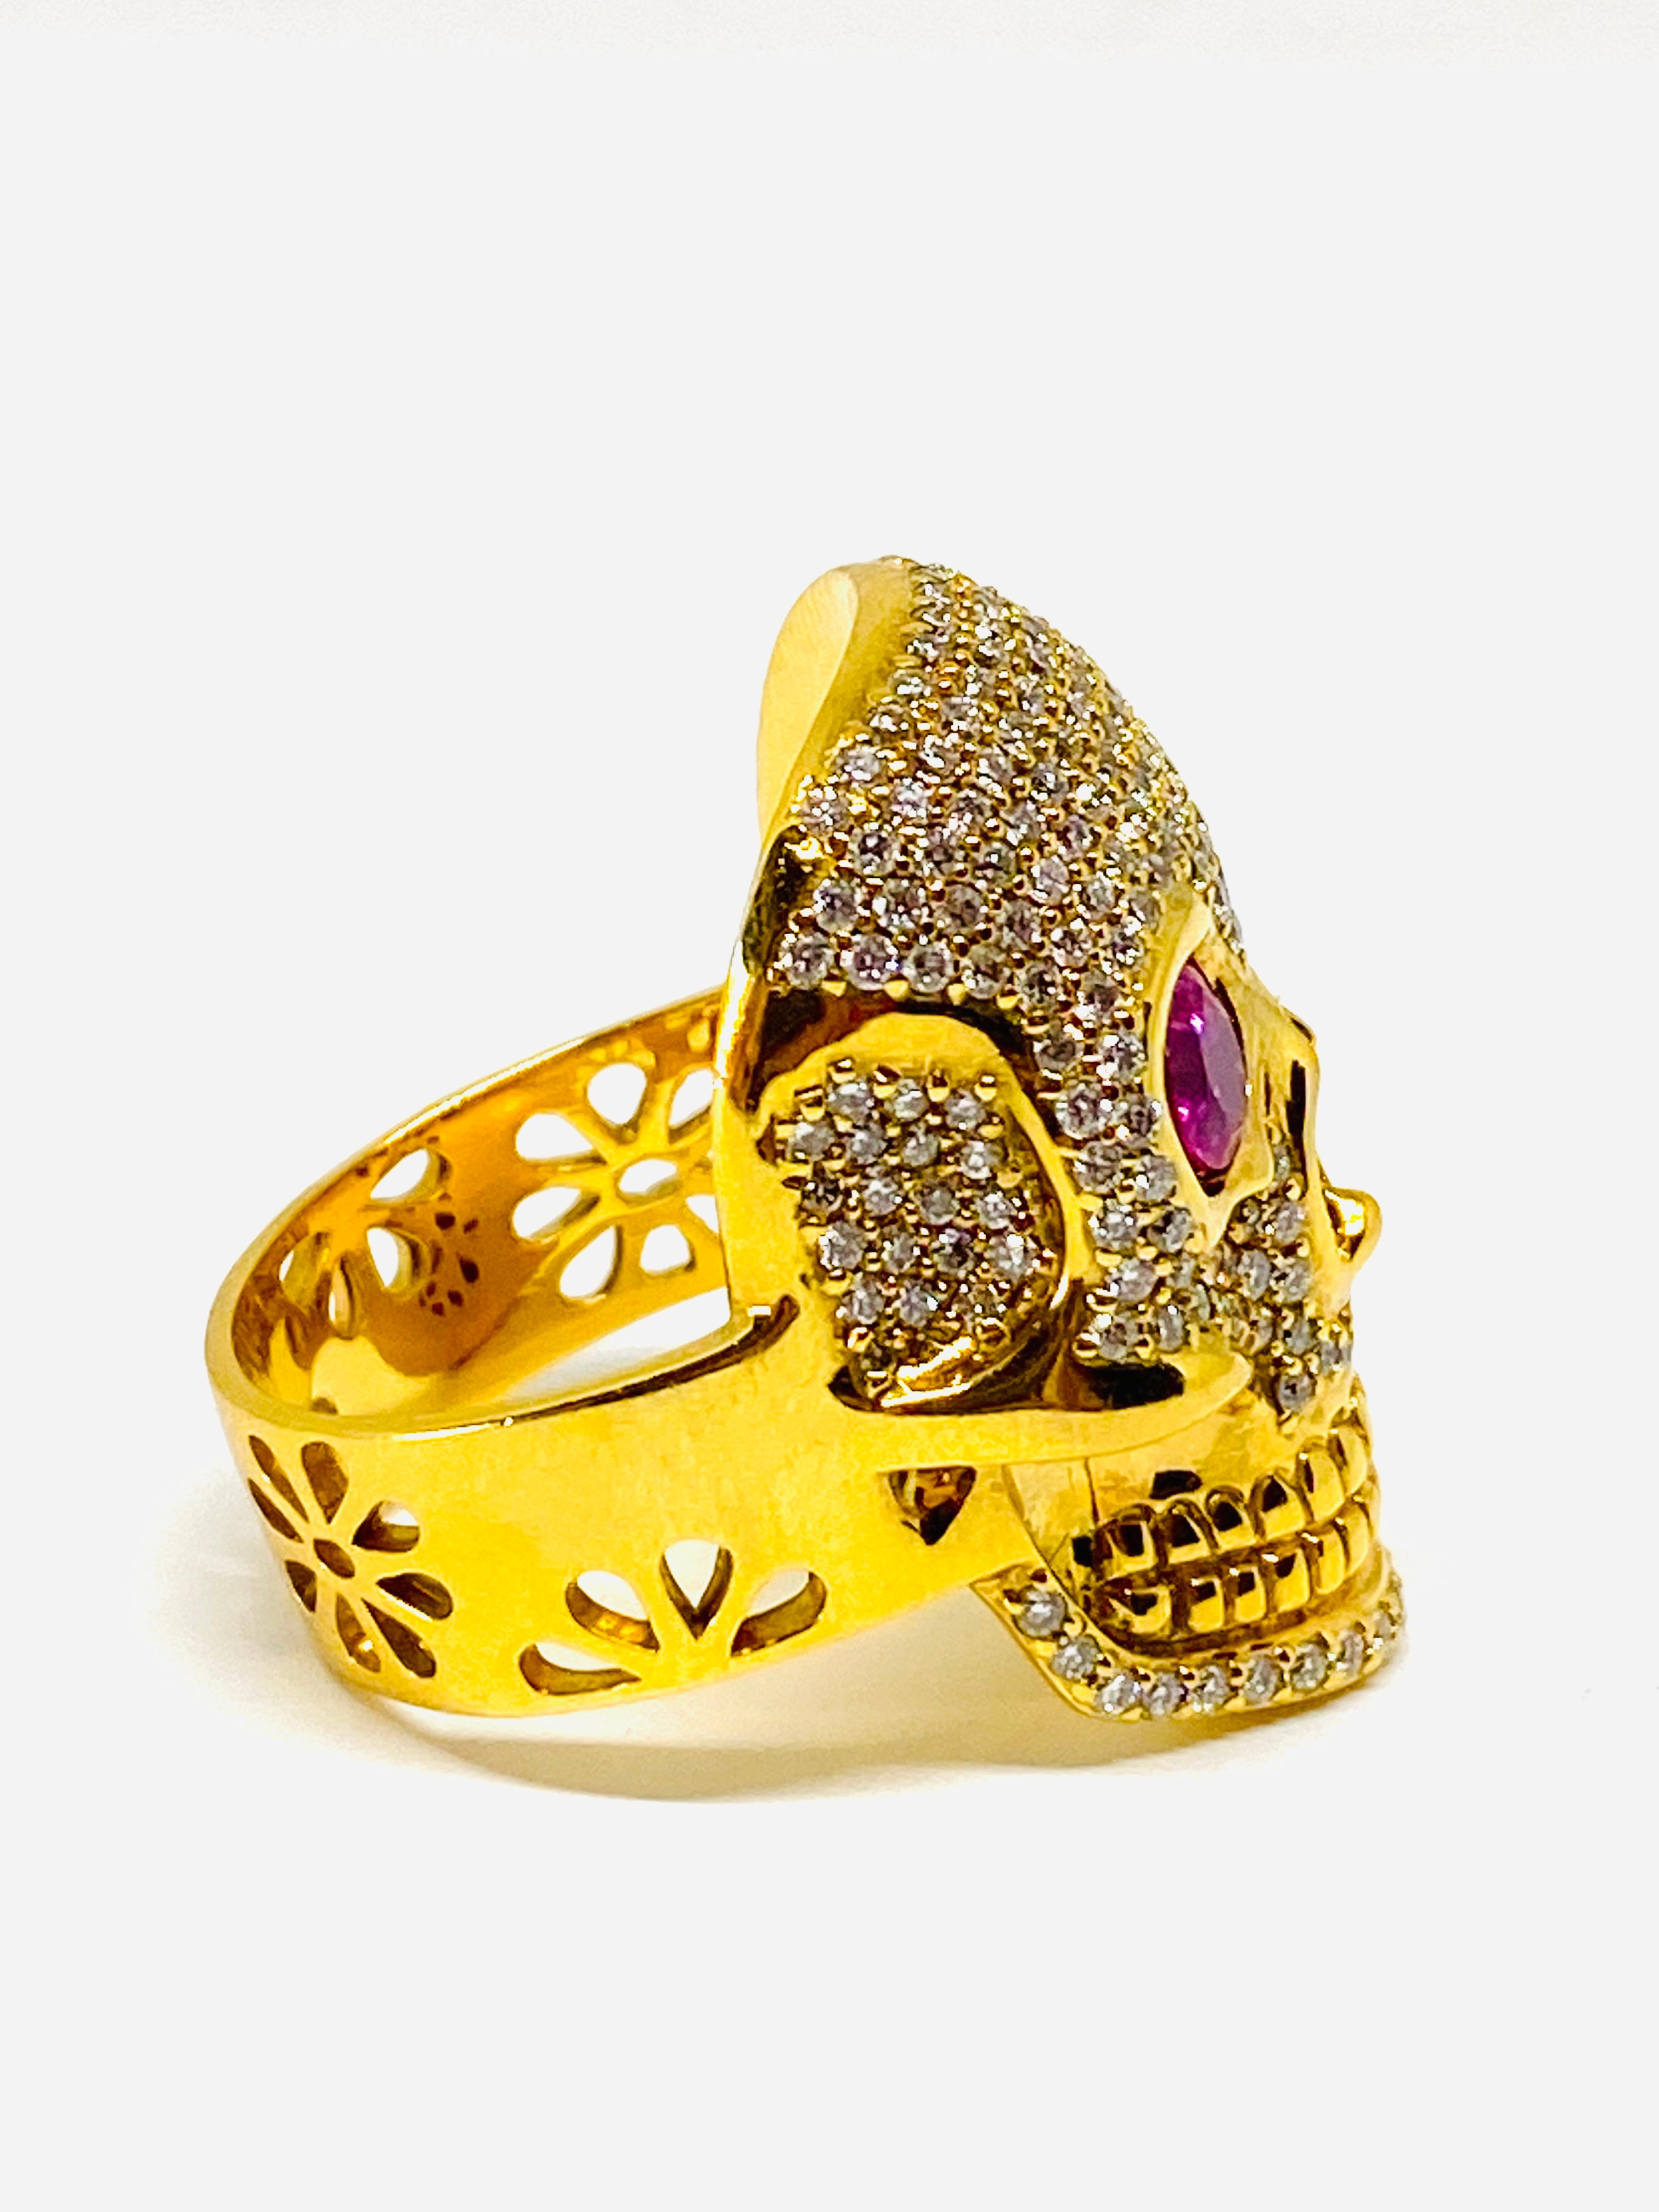 Buddha Mama 20K Yellow Gold Diamond and Pink Tourmaline Scull Coctail Ring 

Product details:
20K Yellow Gold
2ct round pink tourmaline
2ct round brilliant cut diamond, H-I/ VS2
Featuring signature flower cut out on the band of the ring and inside